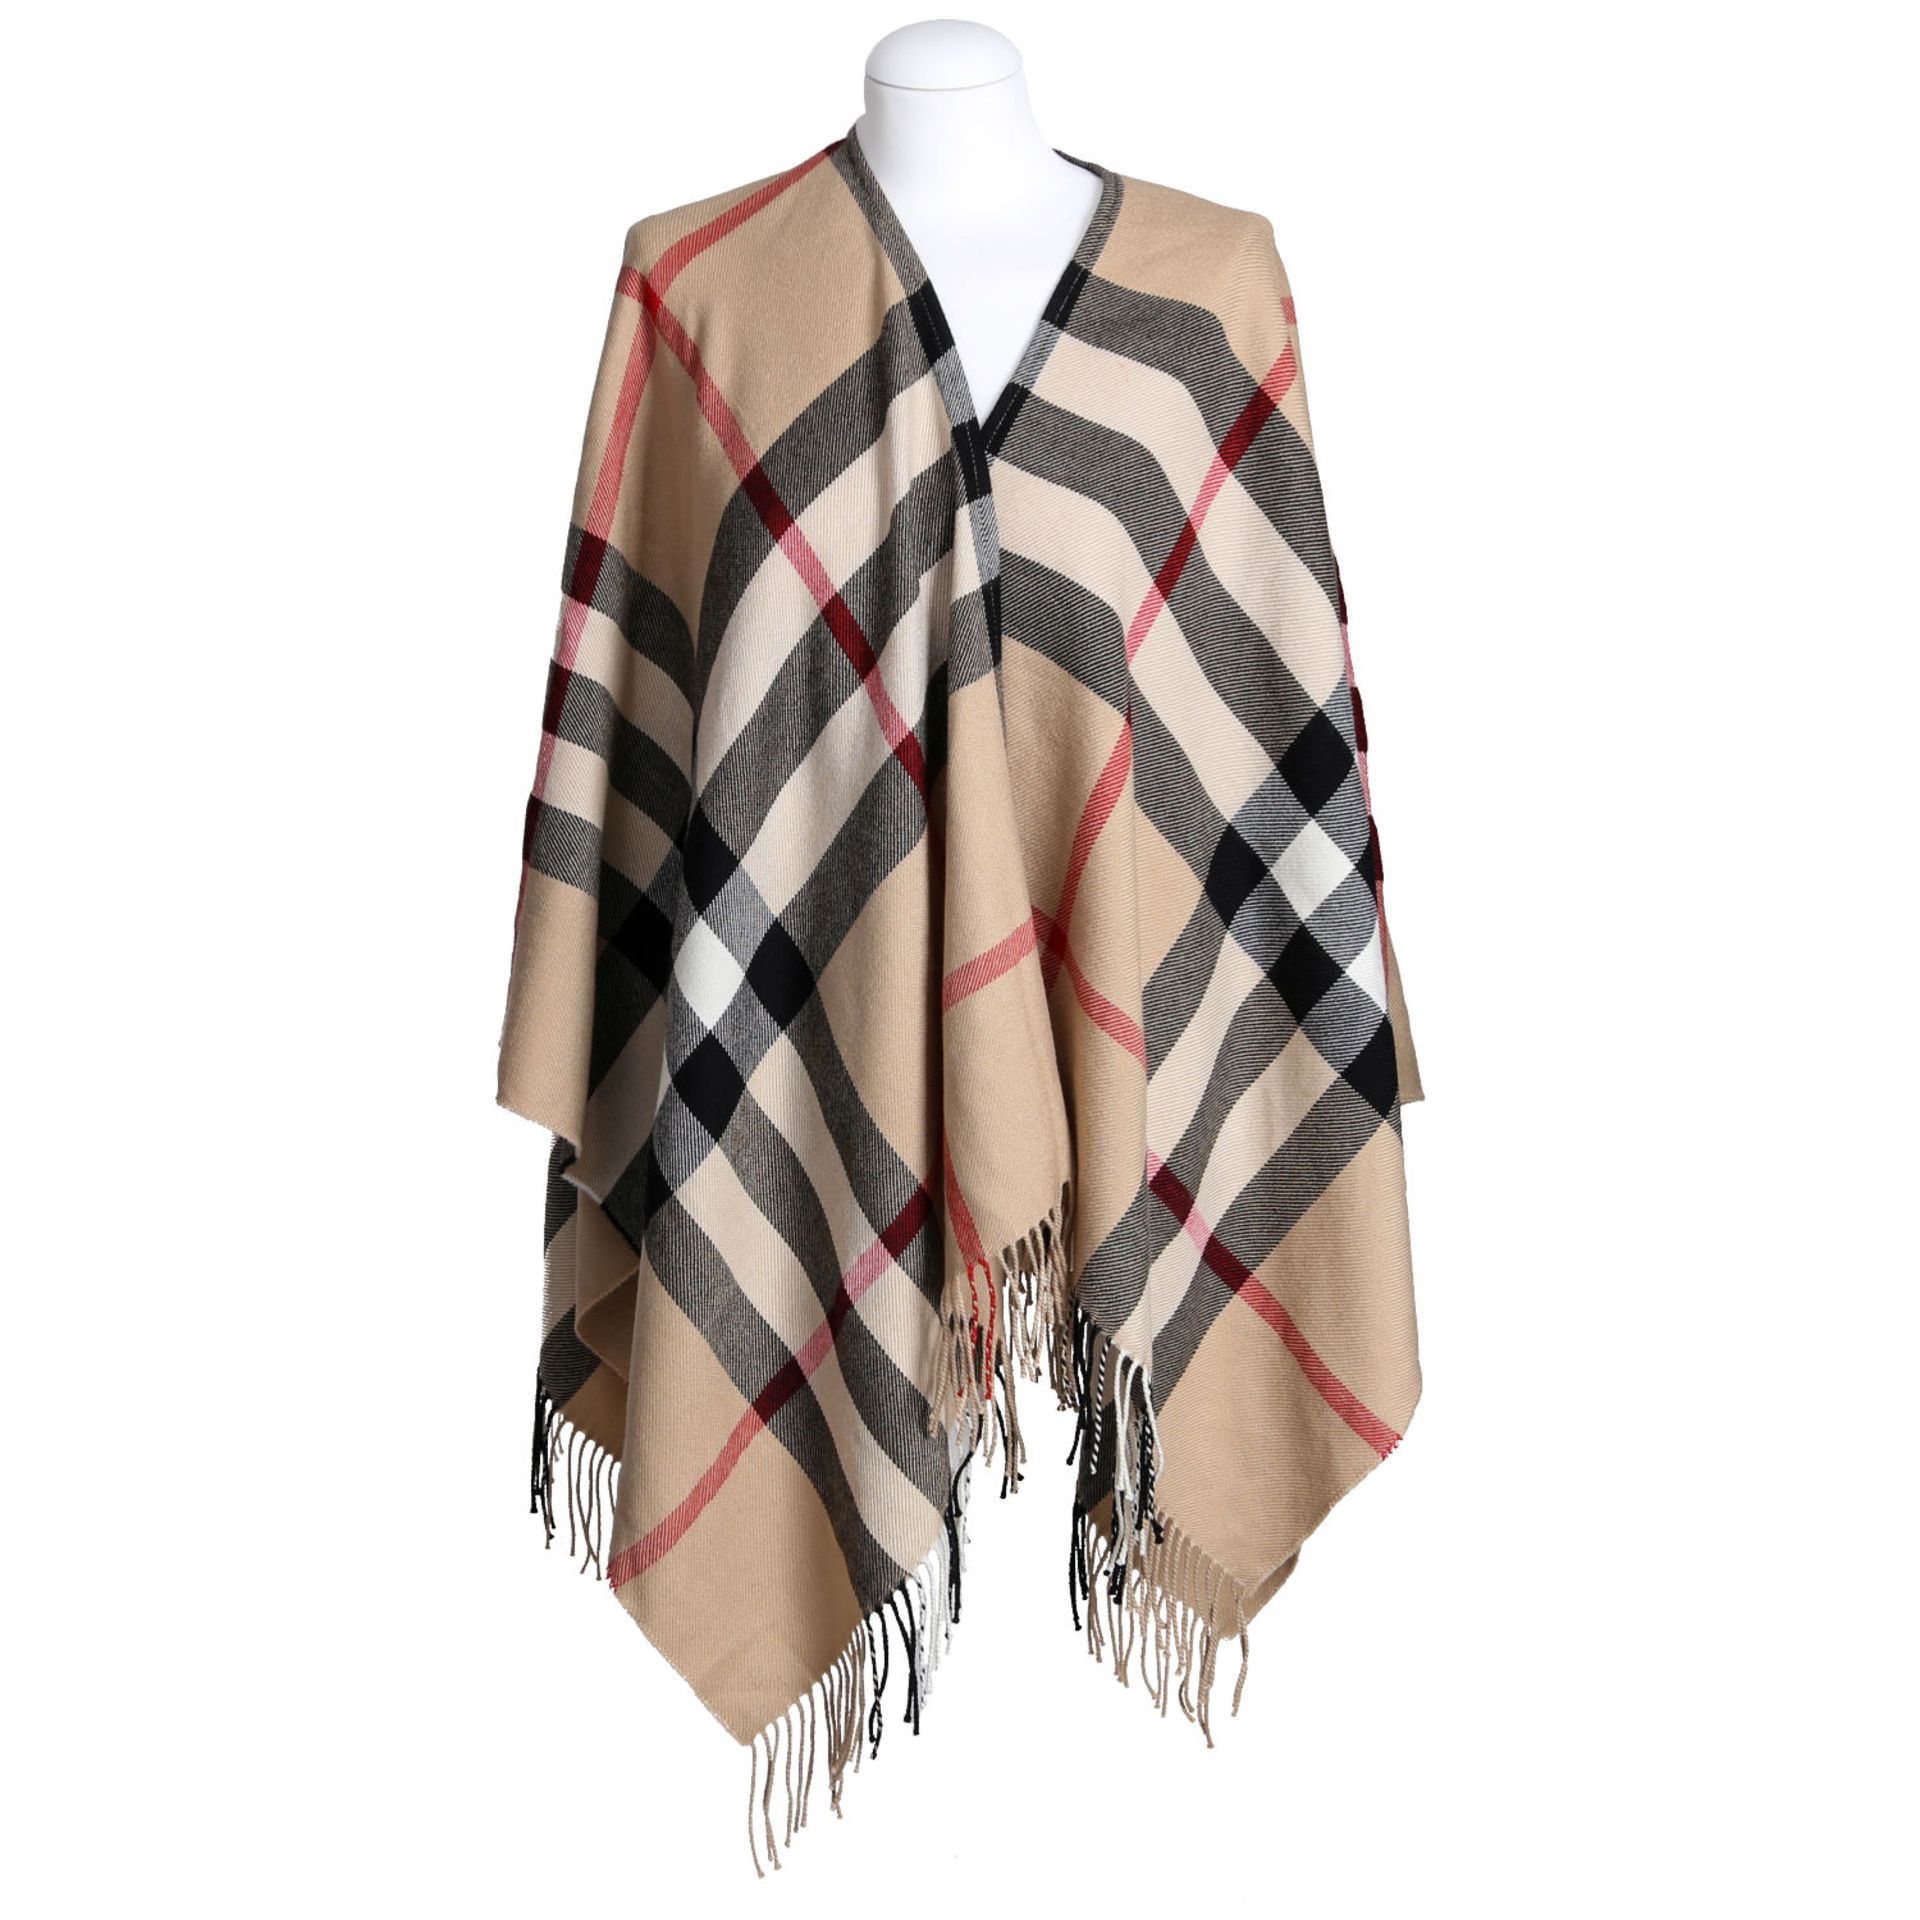 BURBERRY zeitloses Cape, NP: ca. 650,-€. One Size. 100% Merino Wolle, Nova-Check Muster mit